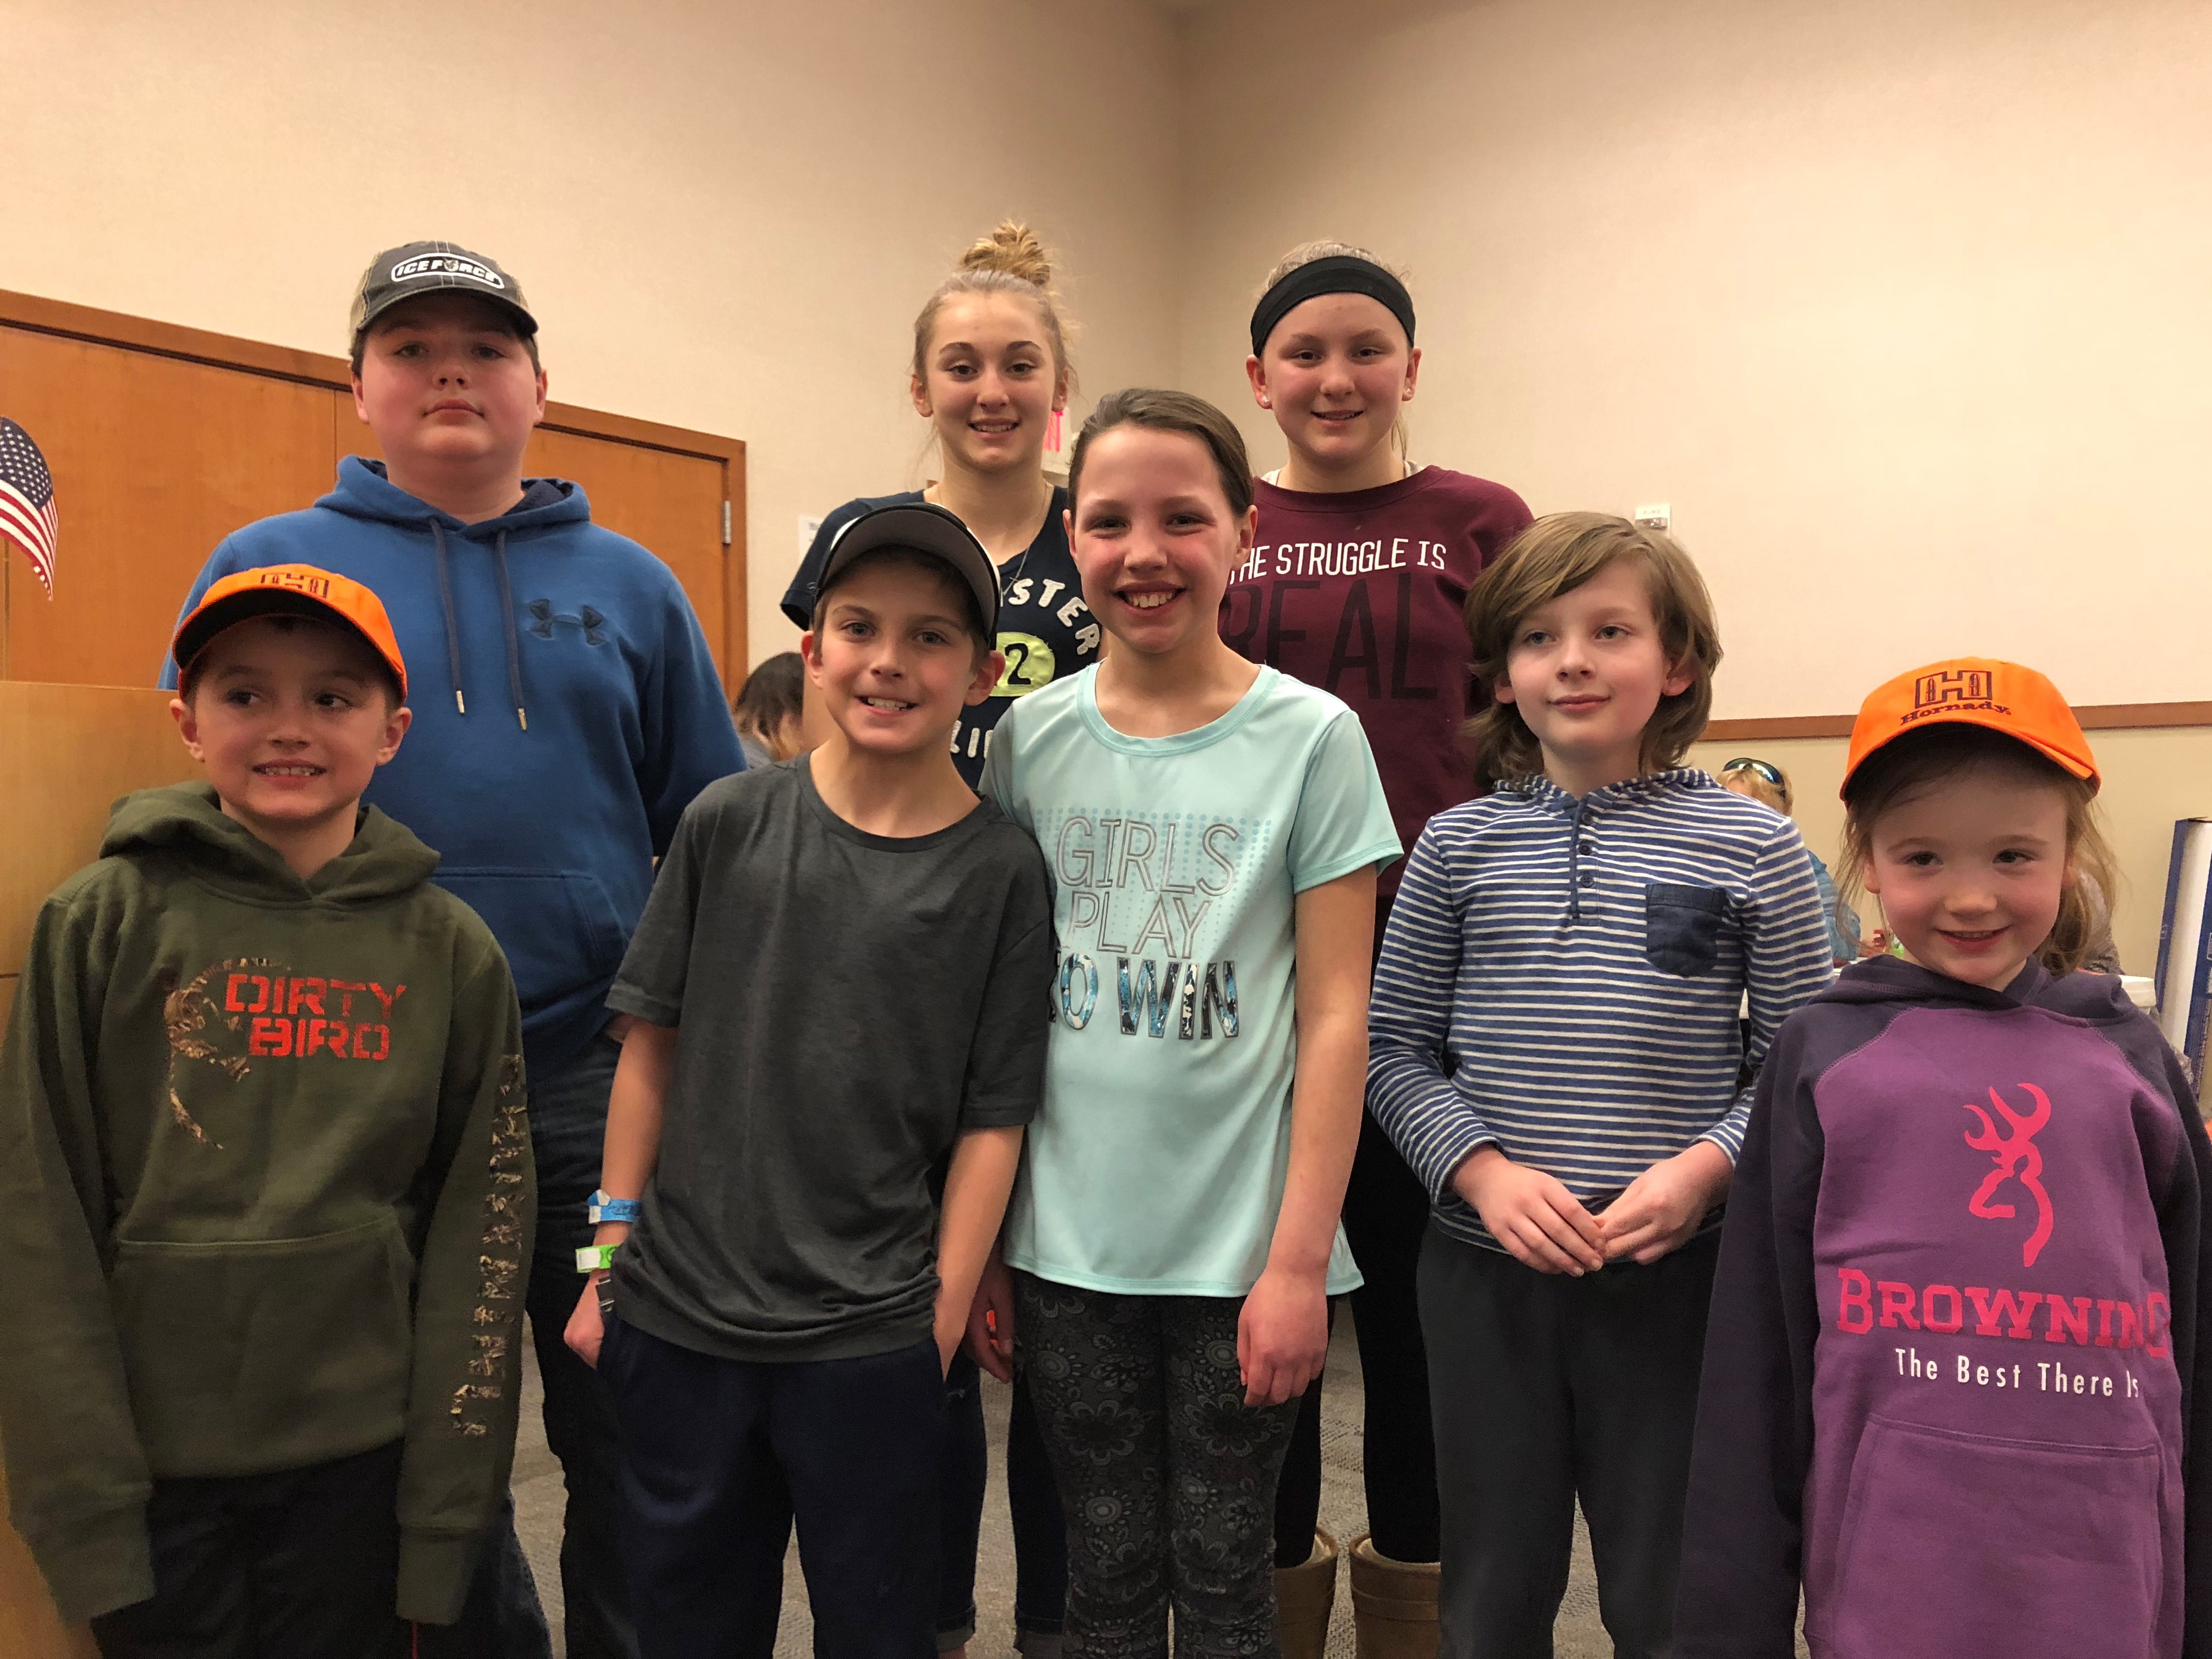 Lifetime small game hunting license winners included Broden Twardowski, Kaiden Zietlow, Lachlan Caputo, Lilly Wewers, Bella Wille, Teagan Wille, Cora Hinsch and Logan Banghart.